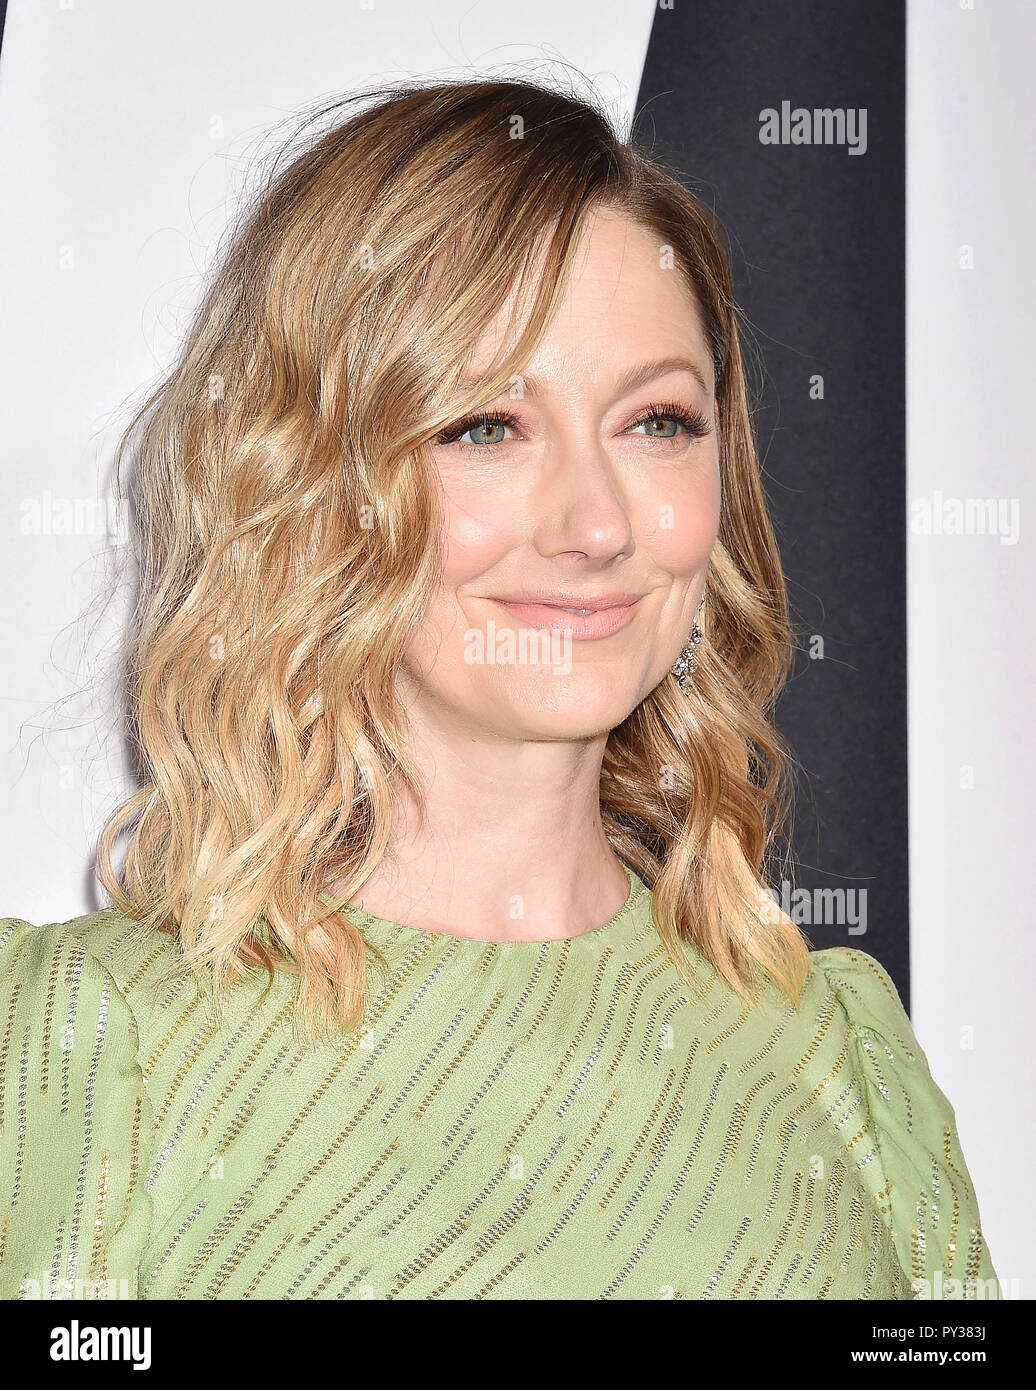 JUDY GREER American film actress  at the Universal Pictures' 'Halloween' Premiere at TCL Chinese Theatre on October 17, 2018 in Hollywood, California. Photo: Jeffrey Mayer Stock Photo